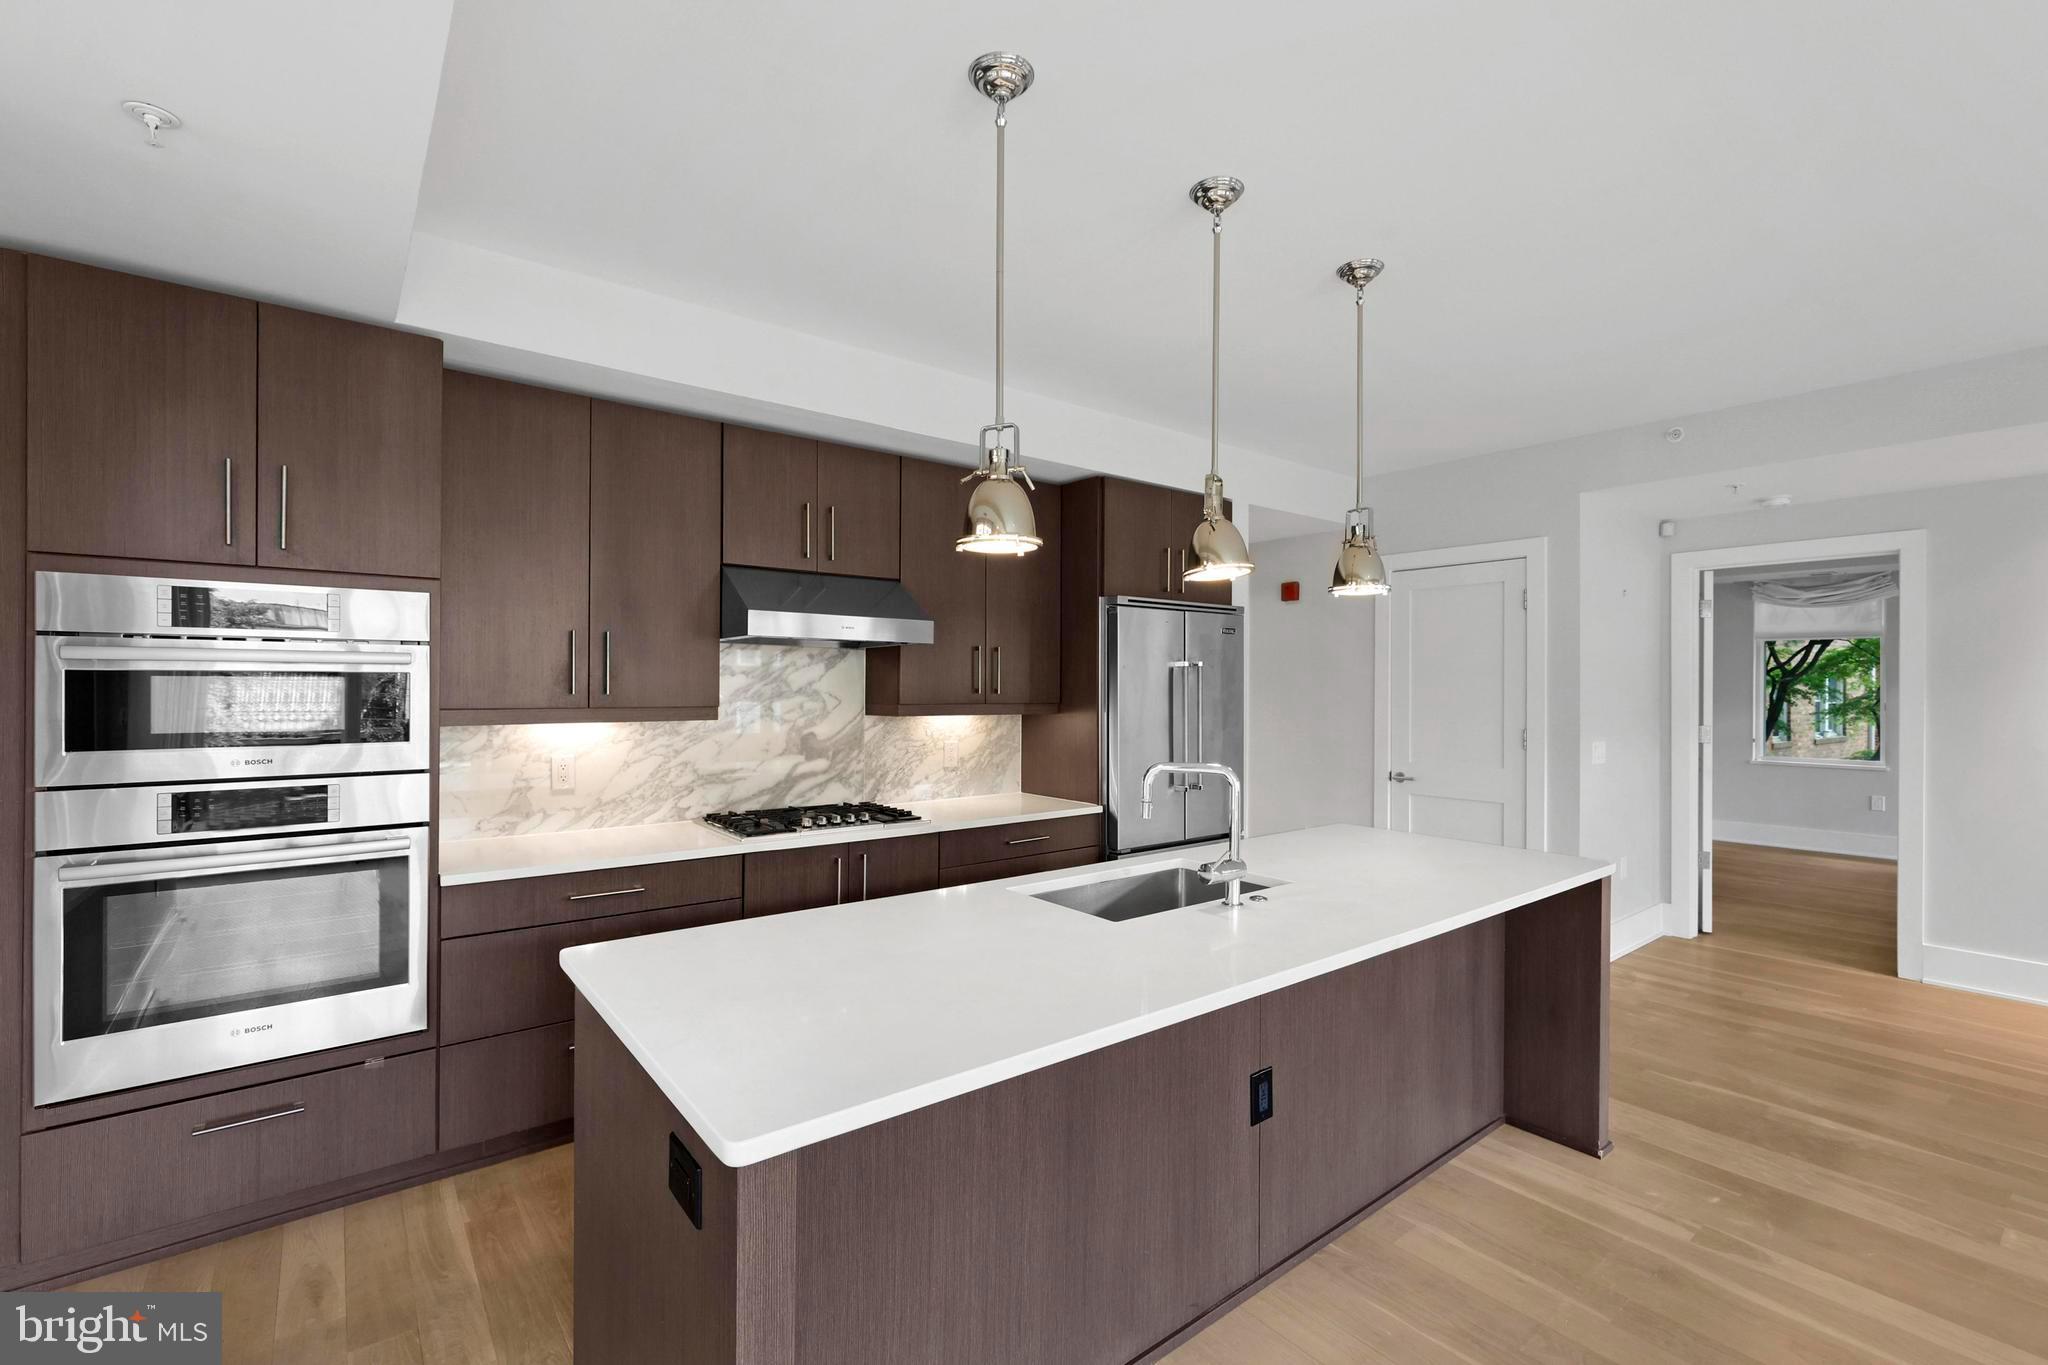 a kitchen with stainless steel appliances kitchen island a large counter top space a sink and wooden floor